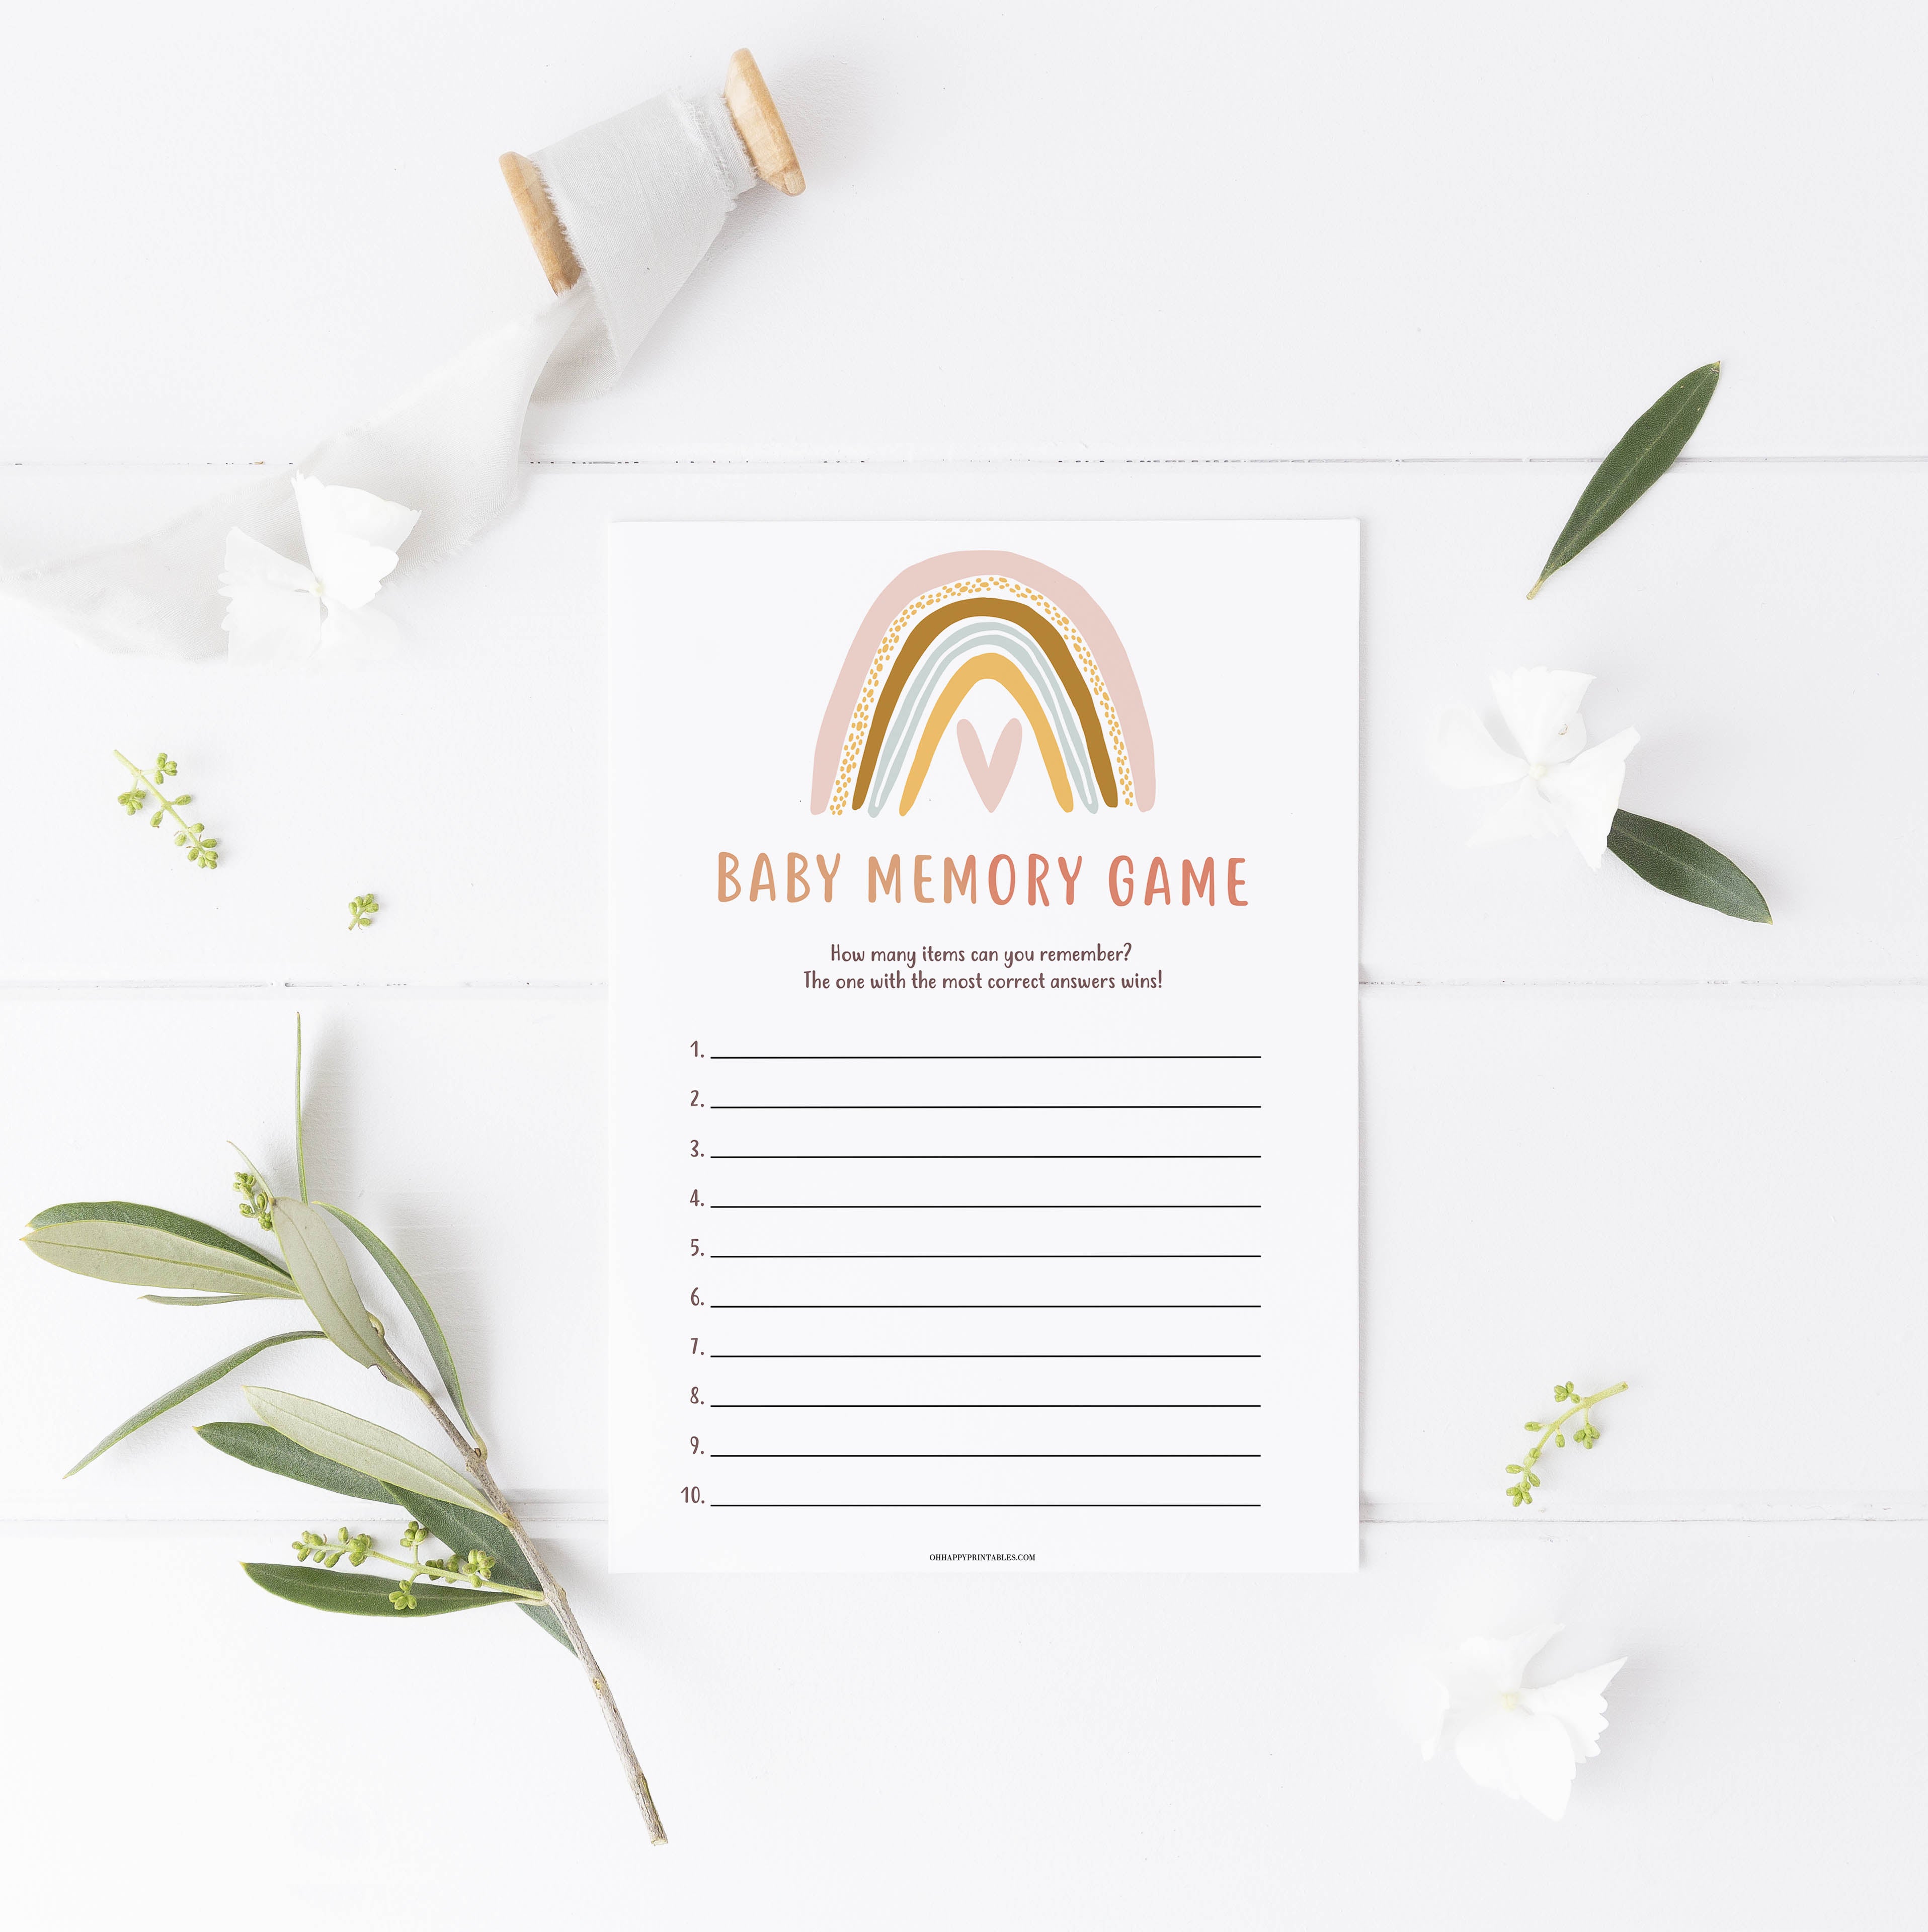 baby memory game, Printable baby shower games, boho rainbow baby games, baby shower games, fun baby shower ideas, top baby shower ideas, boho rainbow baby shower, baby shower games, fun boho rainbow baby shower ideas